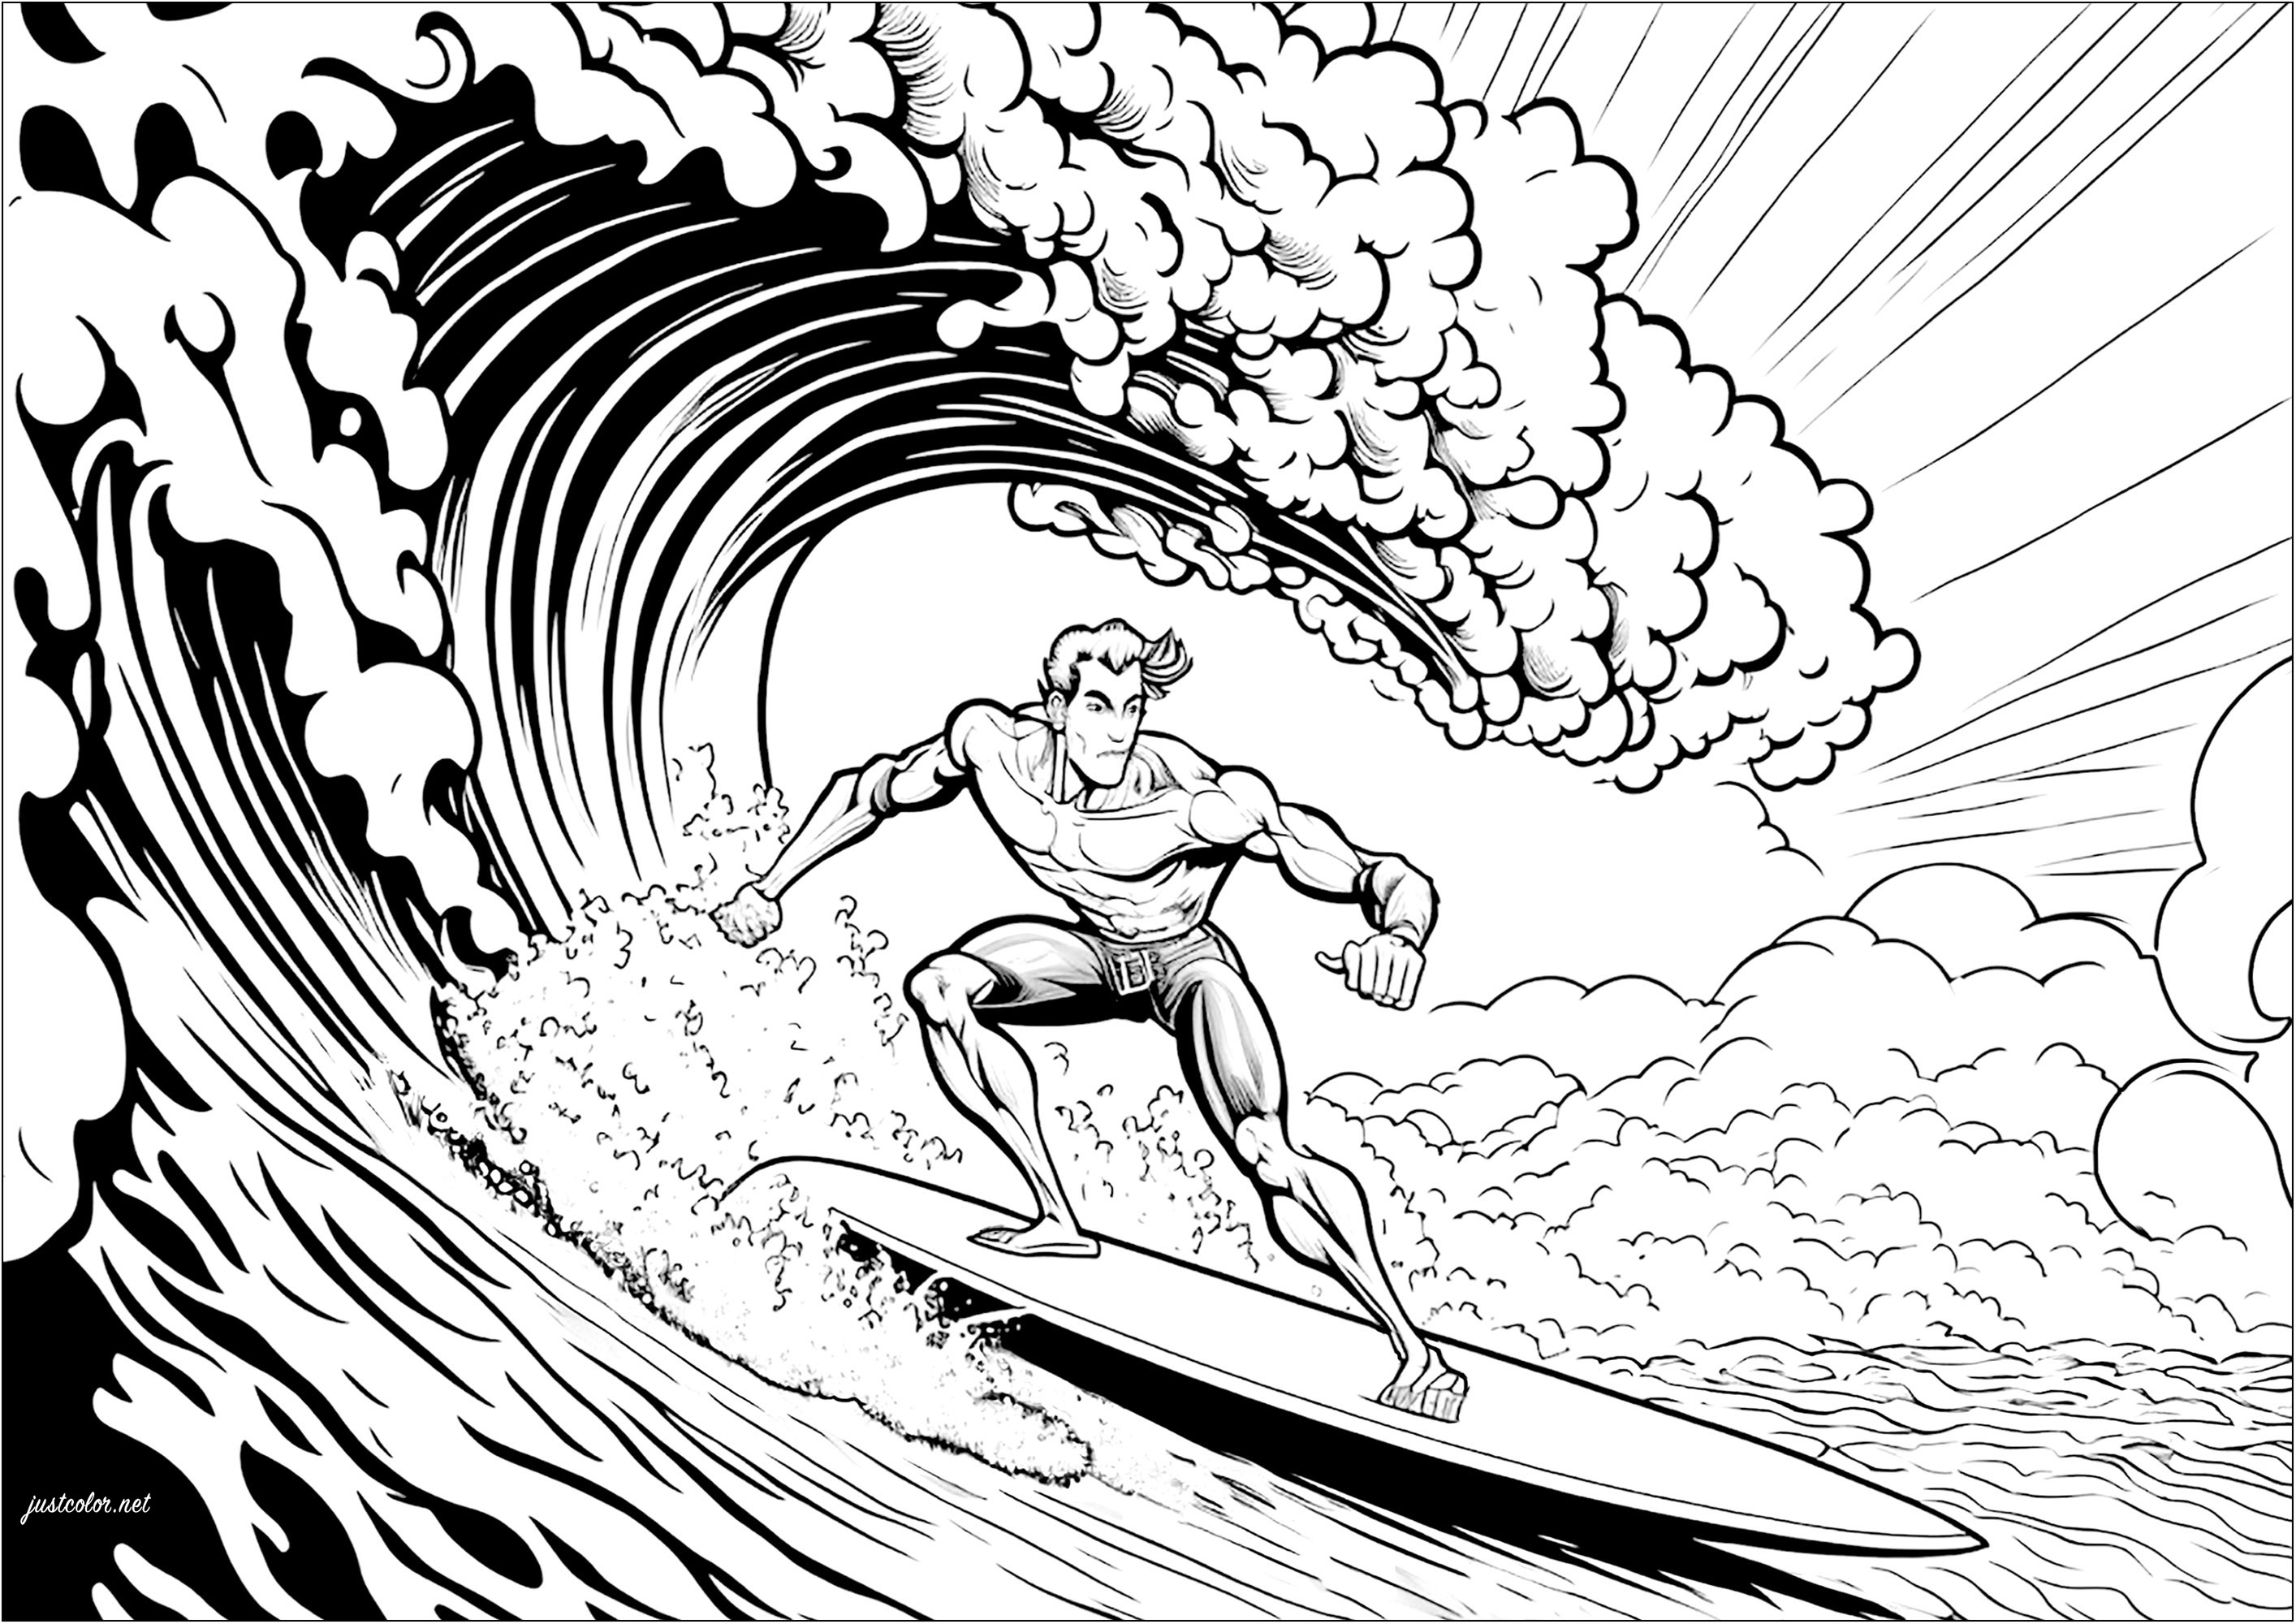 Ride the waves with this fun surfer coloring page !.  Featuring an adrenaline junkie catching a gnarly wave, this illustration is perfect for everyone who loves the ocean. With the sun shining and seagulls flying overhead, use your imagination to bring this scene to life with bright colors, Artiste : IAsabelle